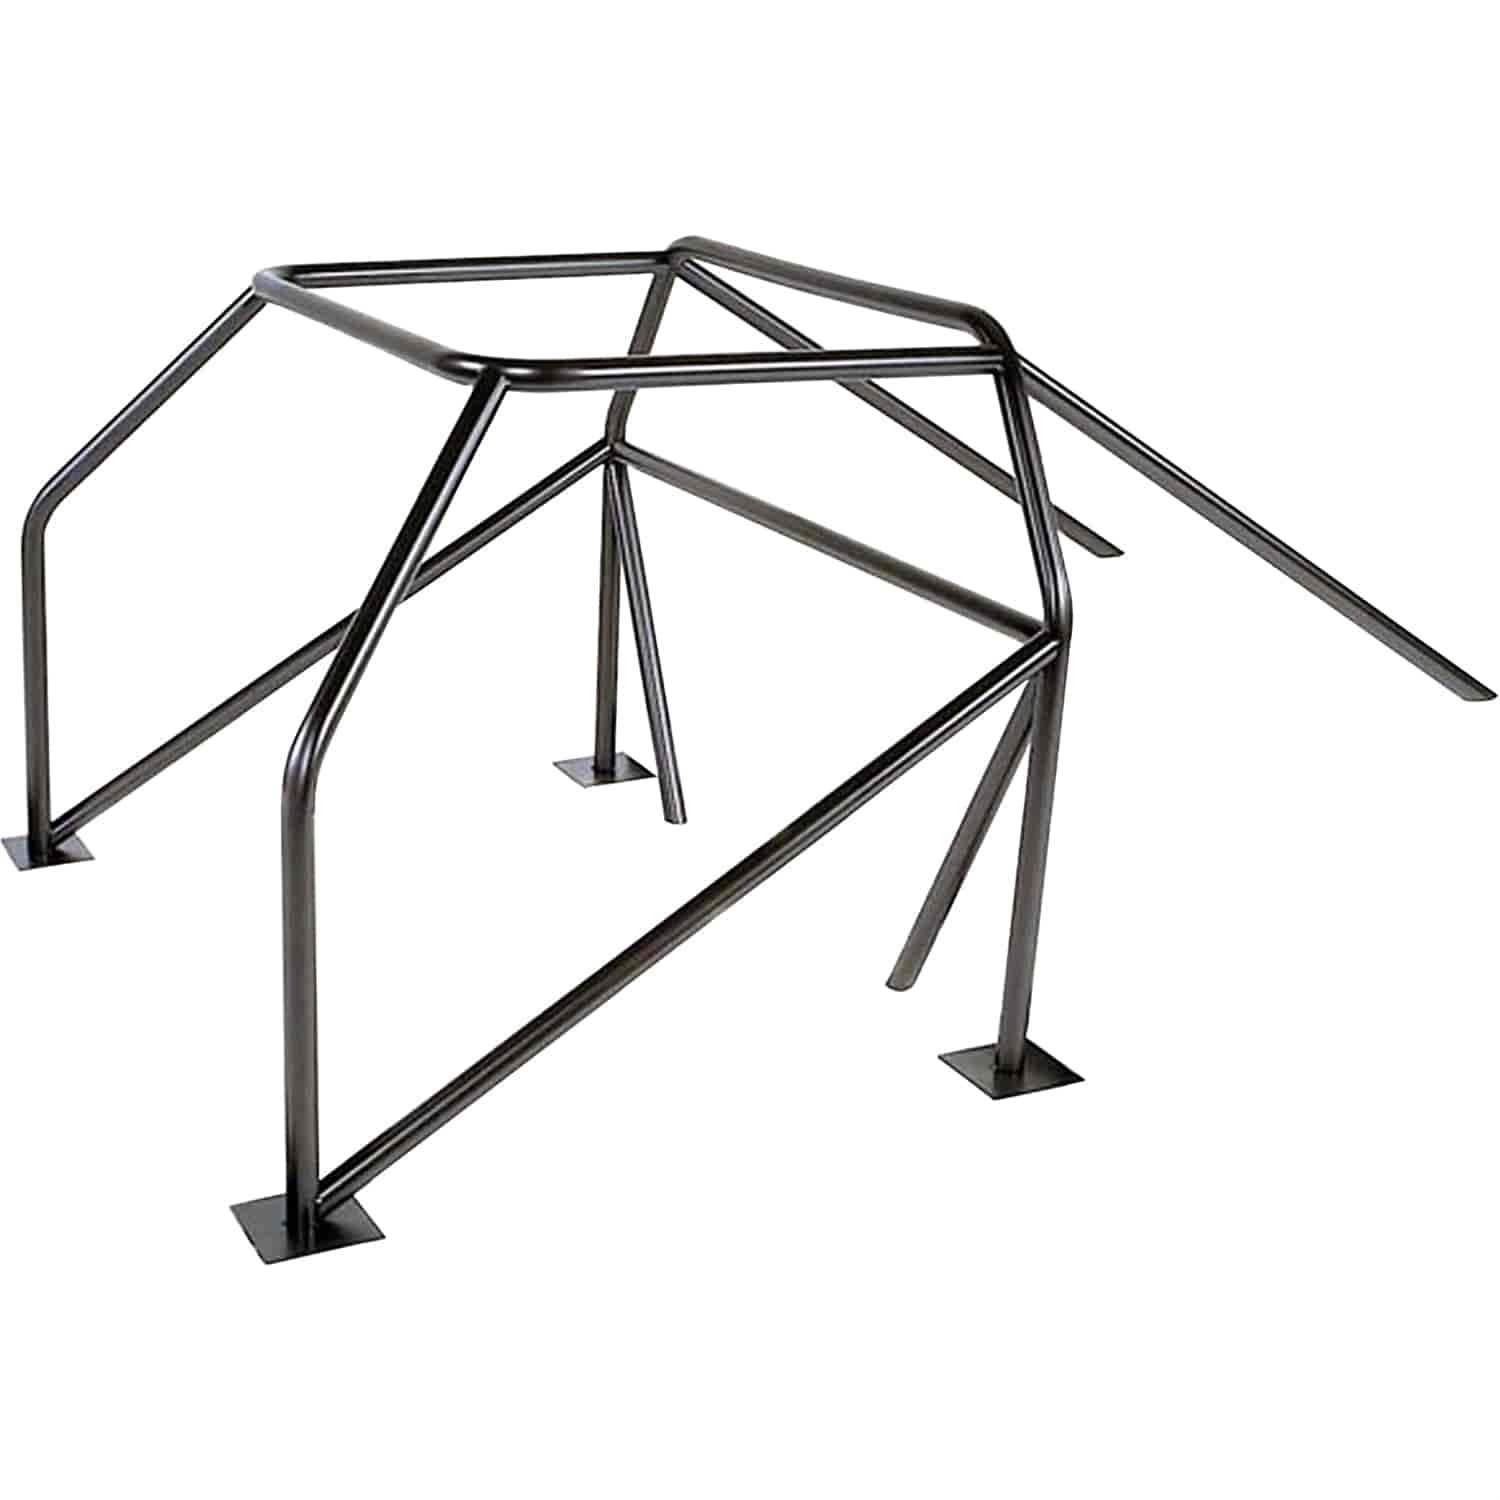 Complete 10-Point Roll Cage Kit 2008-Up Challenger - Mild Steel